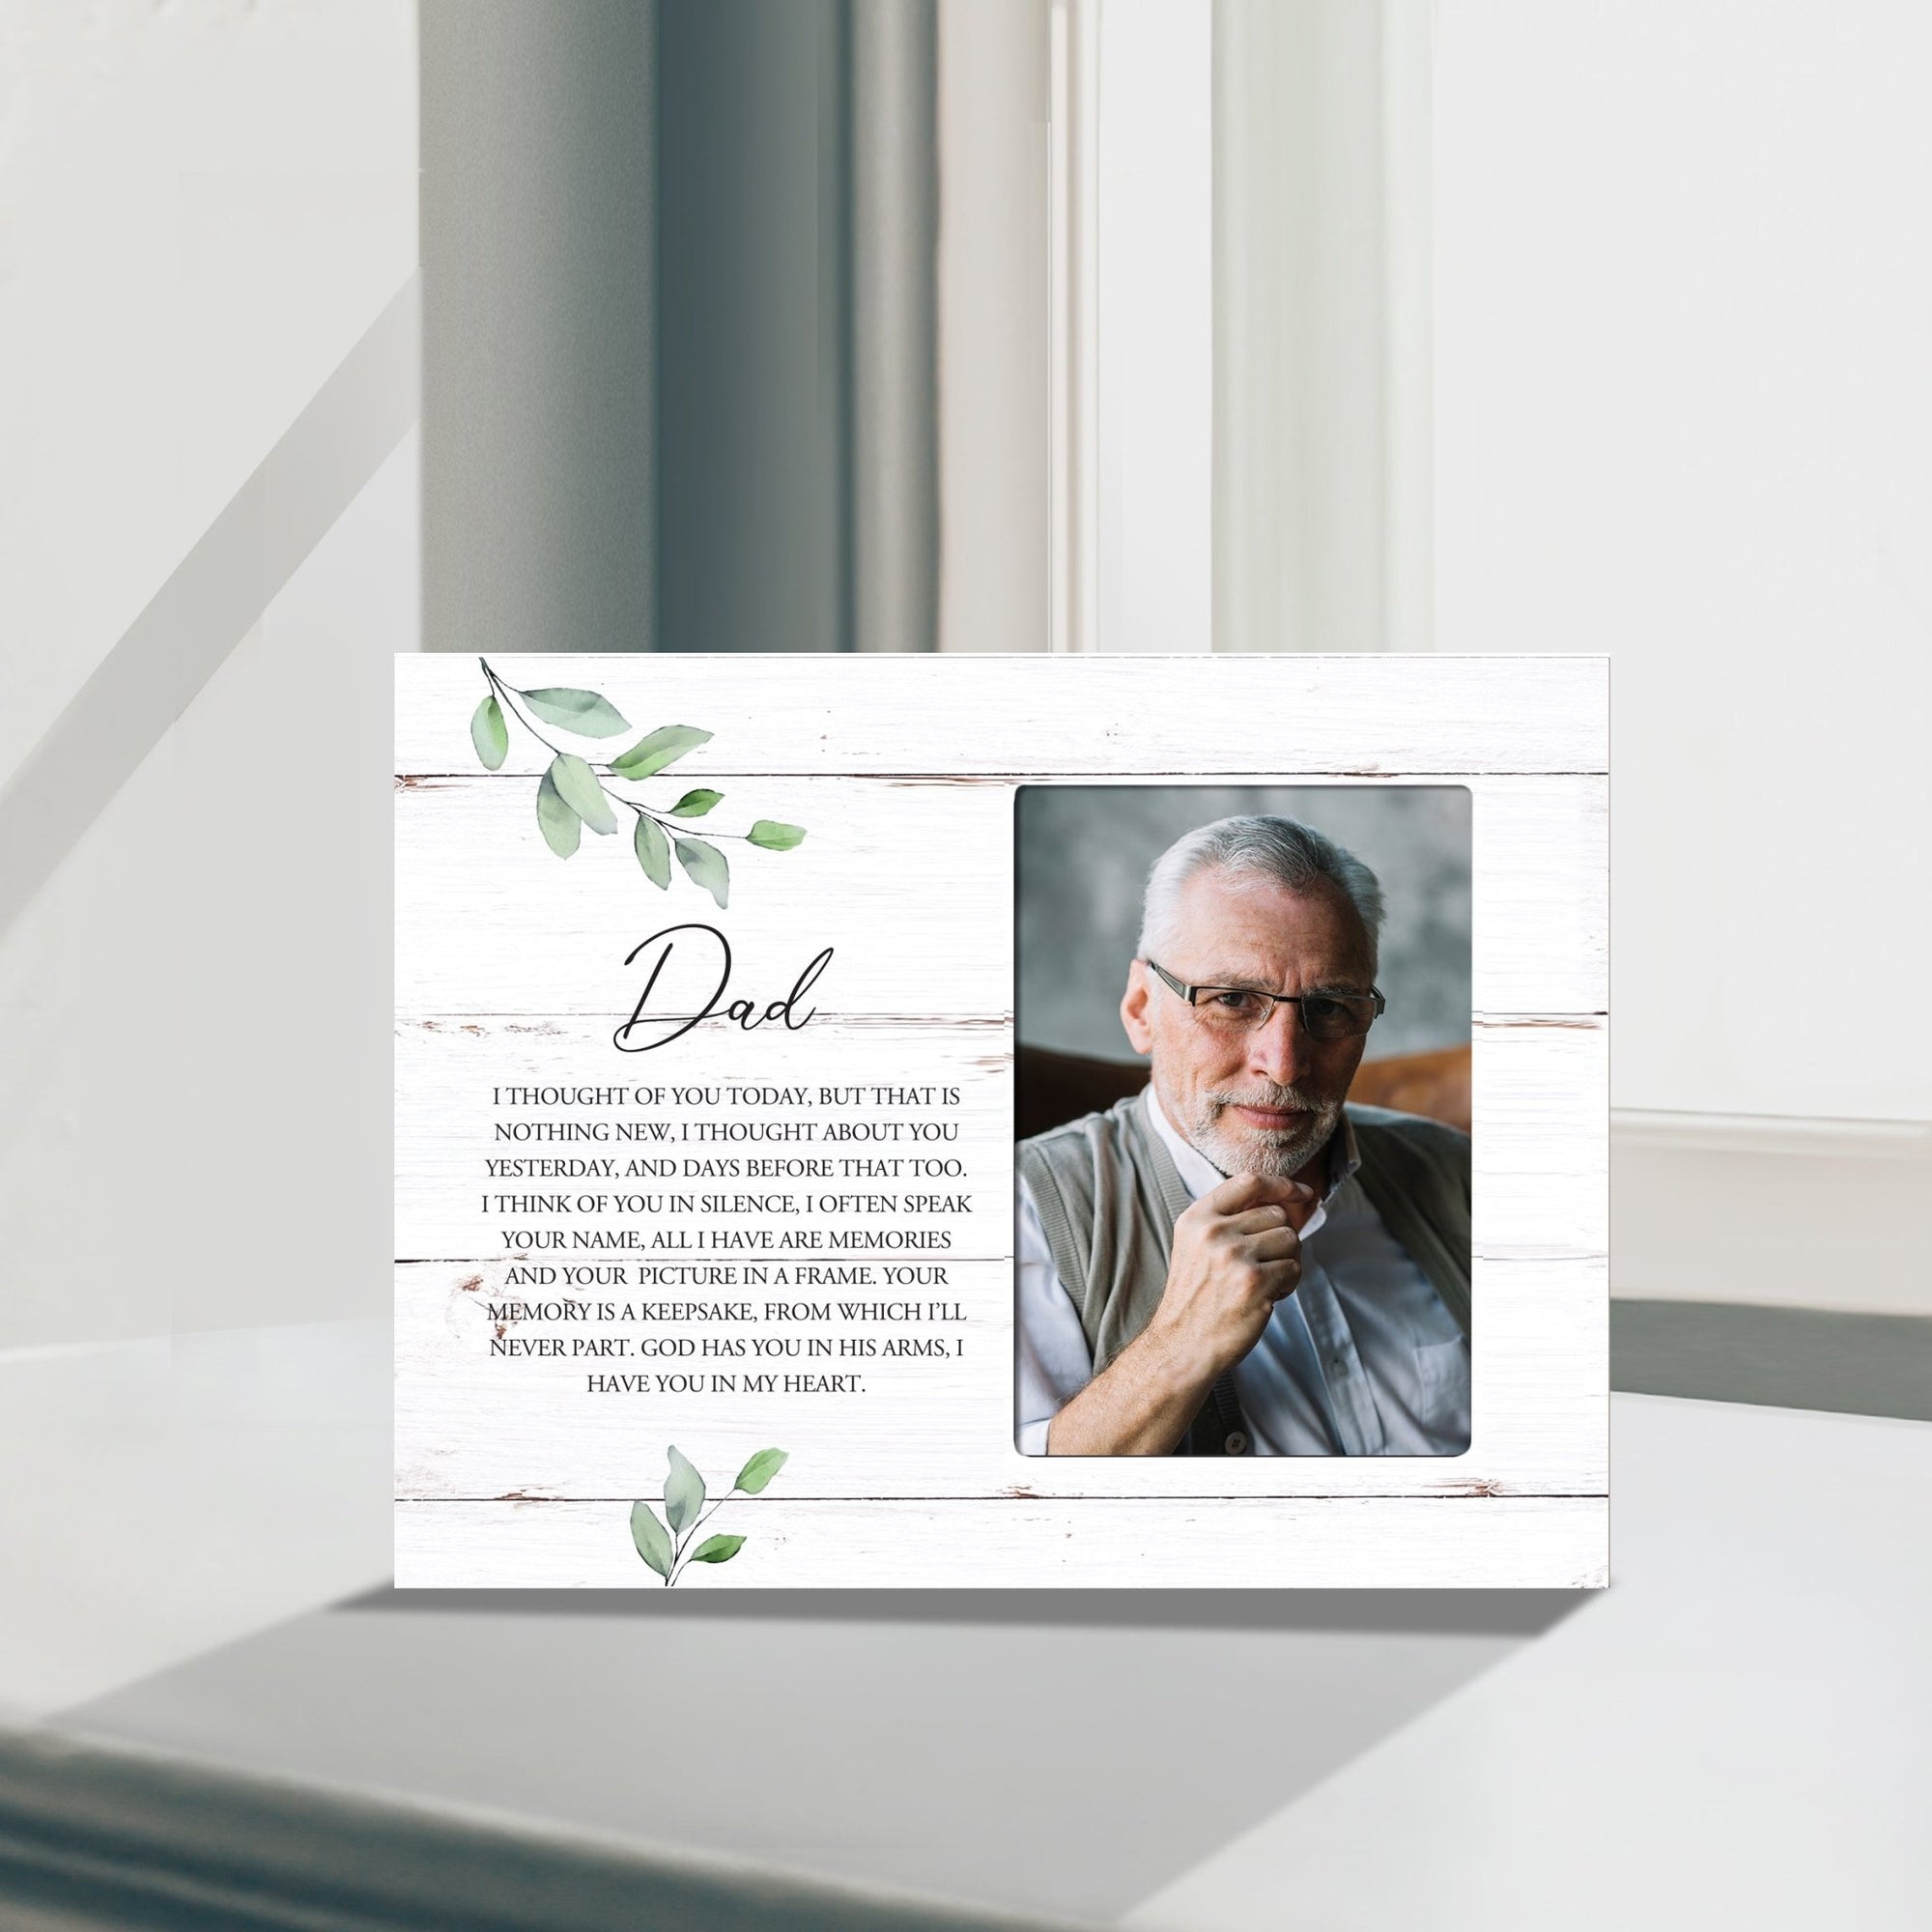 Sentimental Human Memorial Photo Frame Gift Bereavement Gift Idea - Dad I thought of you - LifeSong Milestones